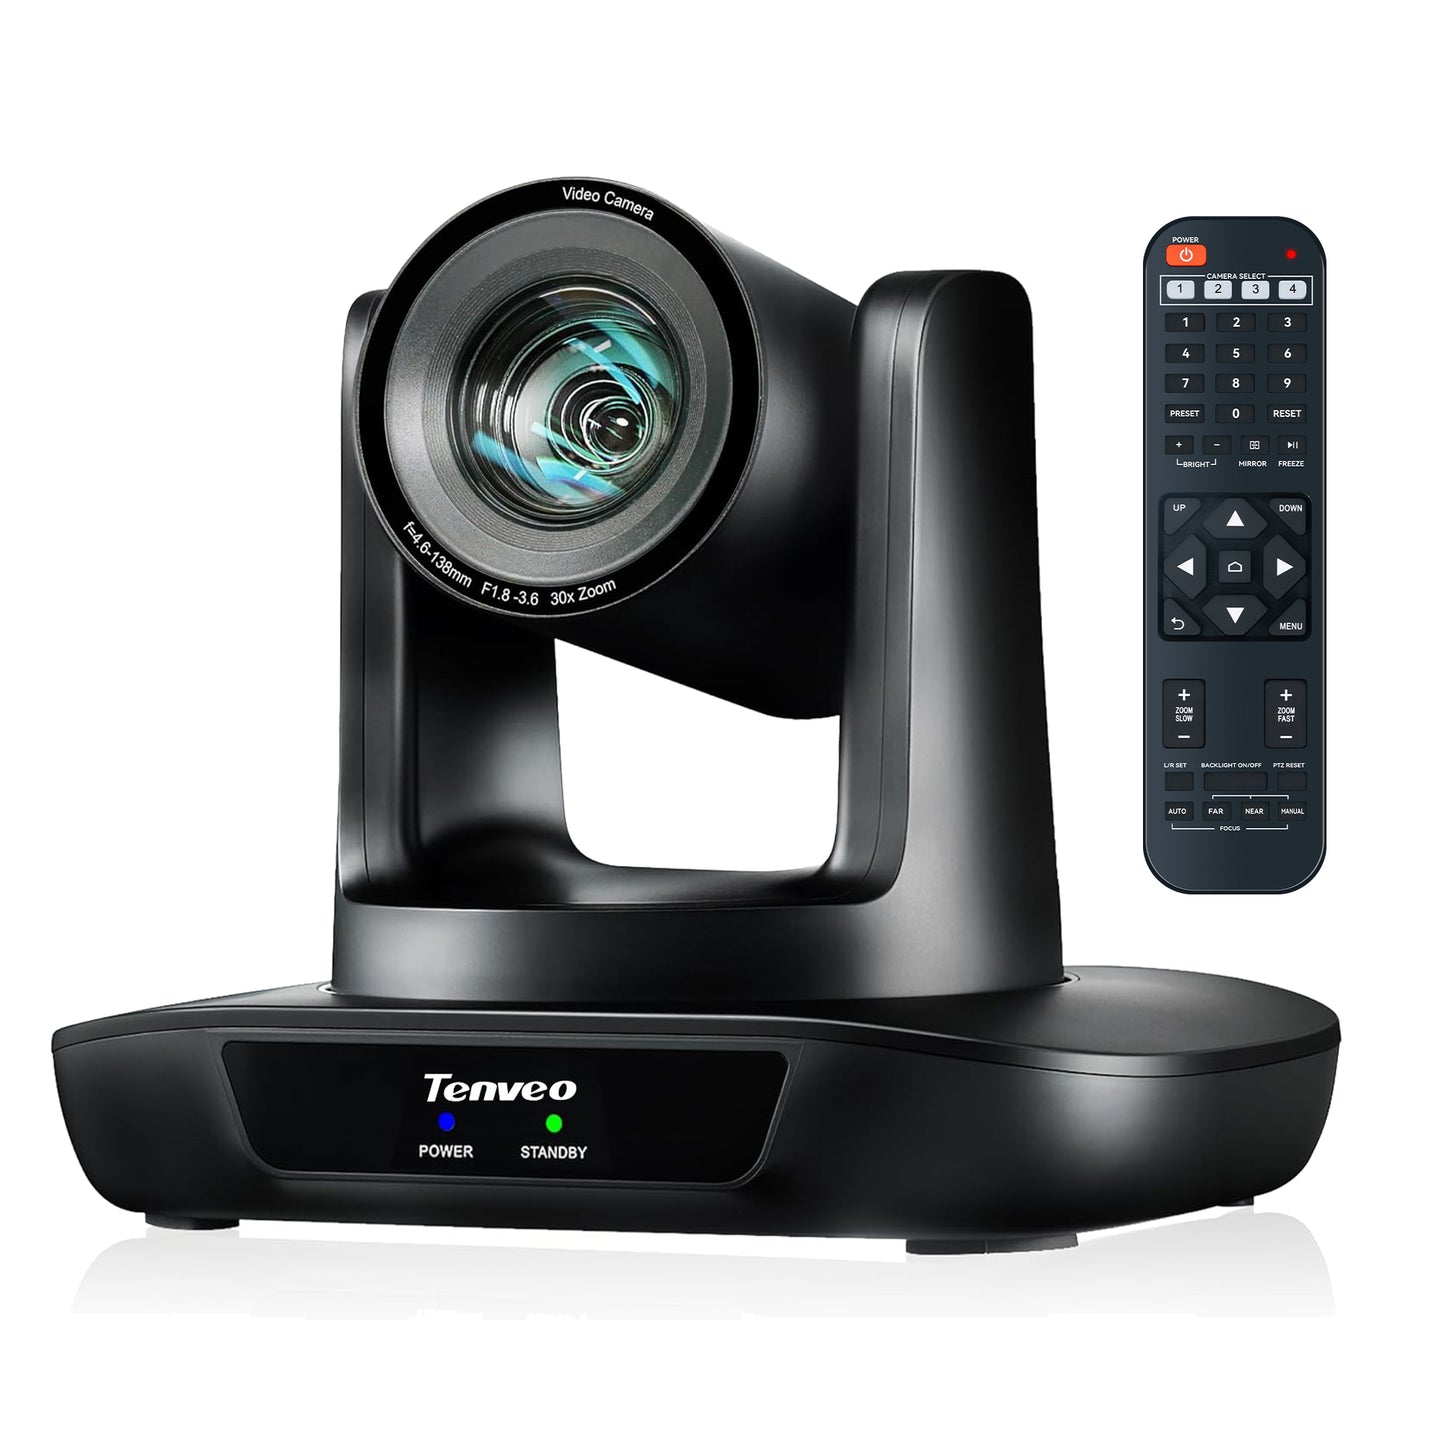 Tenveo UHDMAX NDI 1080P FHD PTZ Conference Camera with Smart Auto Tracking, 30X Optical Zoom, 2MP 1/2.8" Sony Sensor, 3G-SDI, HDMI, USB, and LAN Output for Video Live Streaming, Broadcast, Meeting & Conferencing